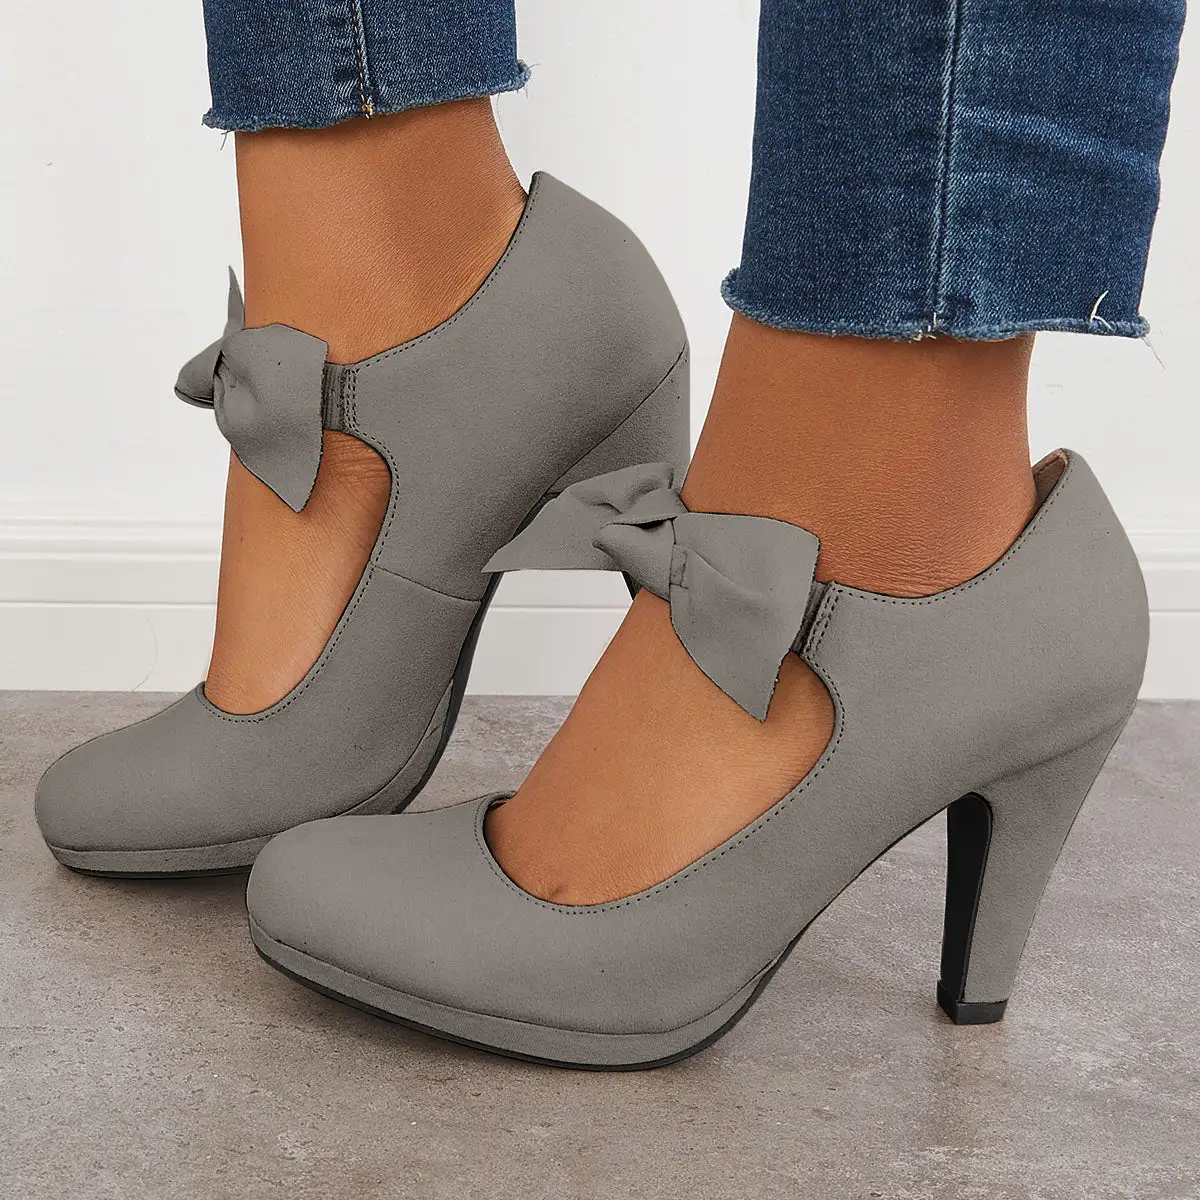 Thick Heel Mary Jane Pumps Bowknot Round Toe Ankle Strap Heels